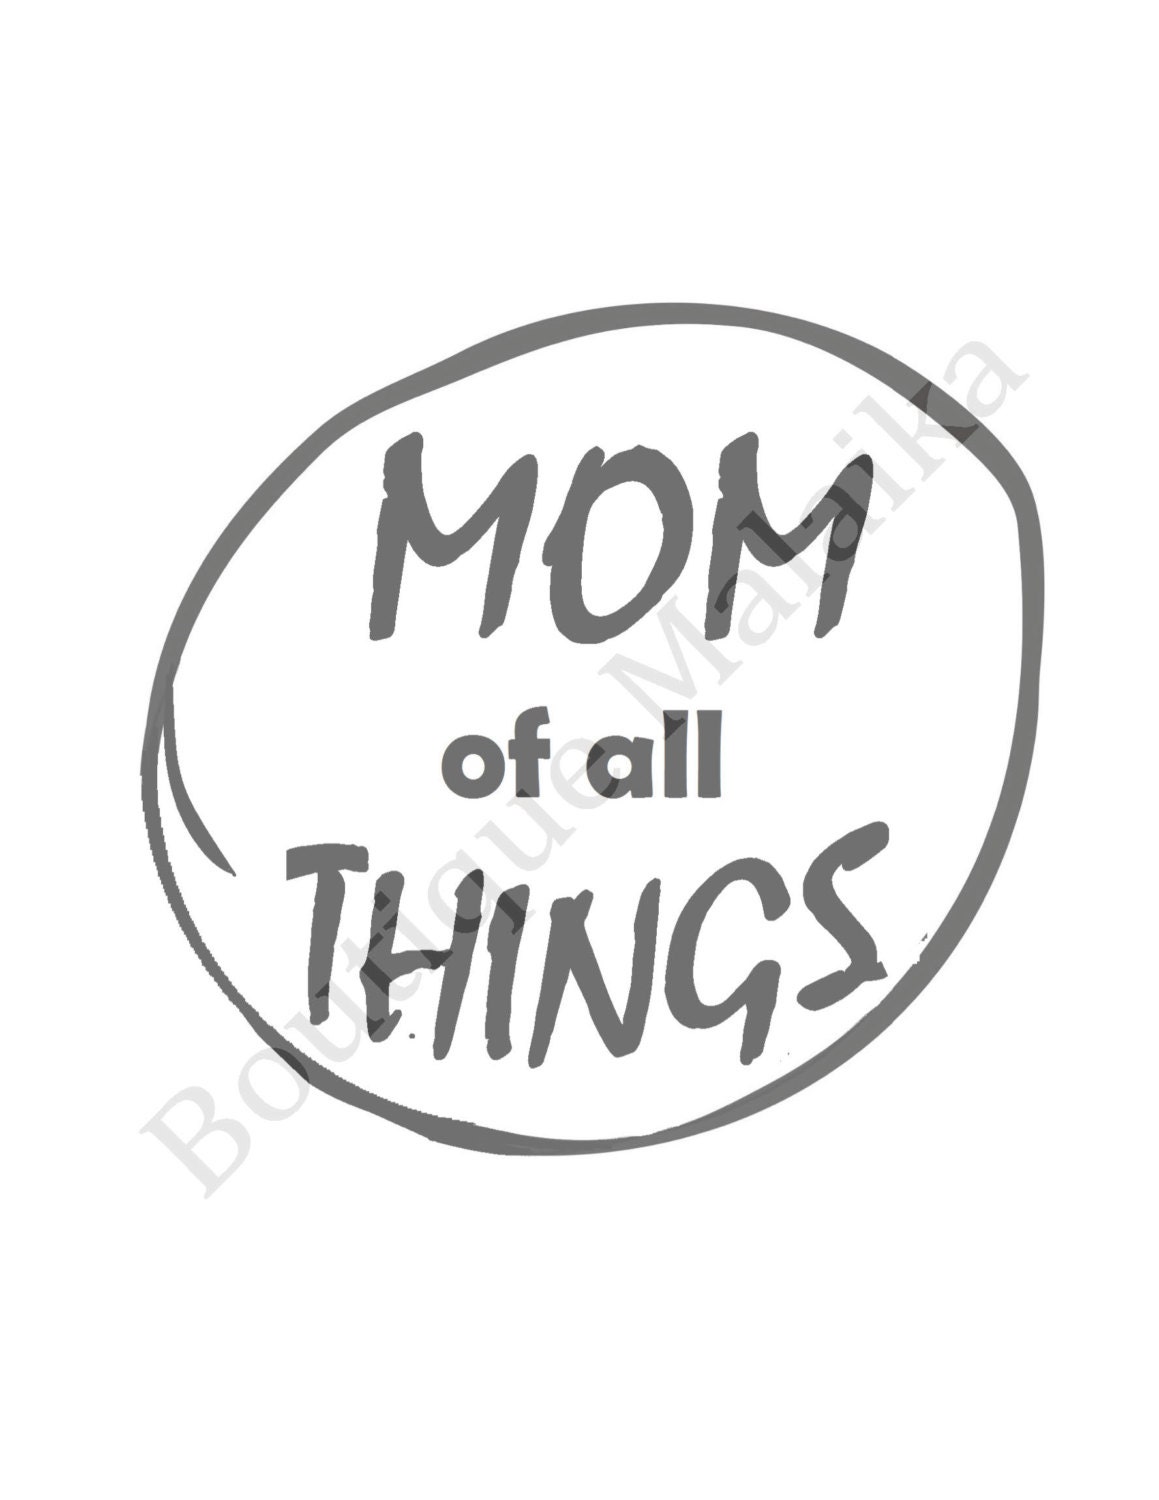 Download MOM of all THINGS Instant Downloads-Dr. Seuss by BoutiqueMalaika